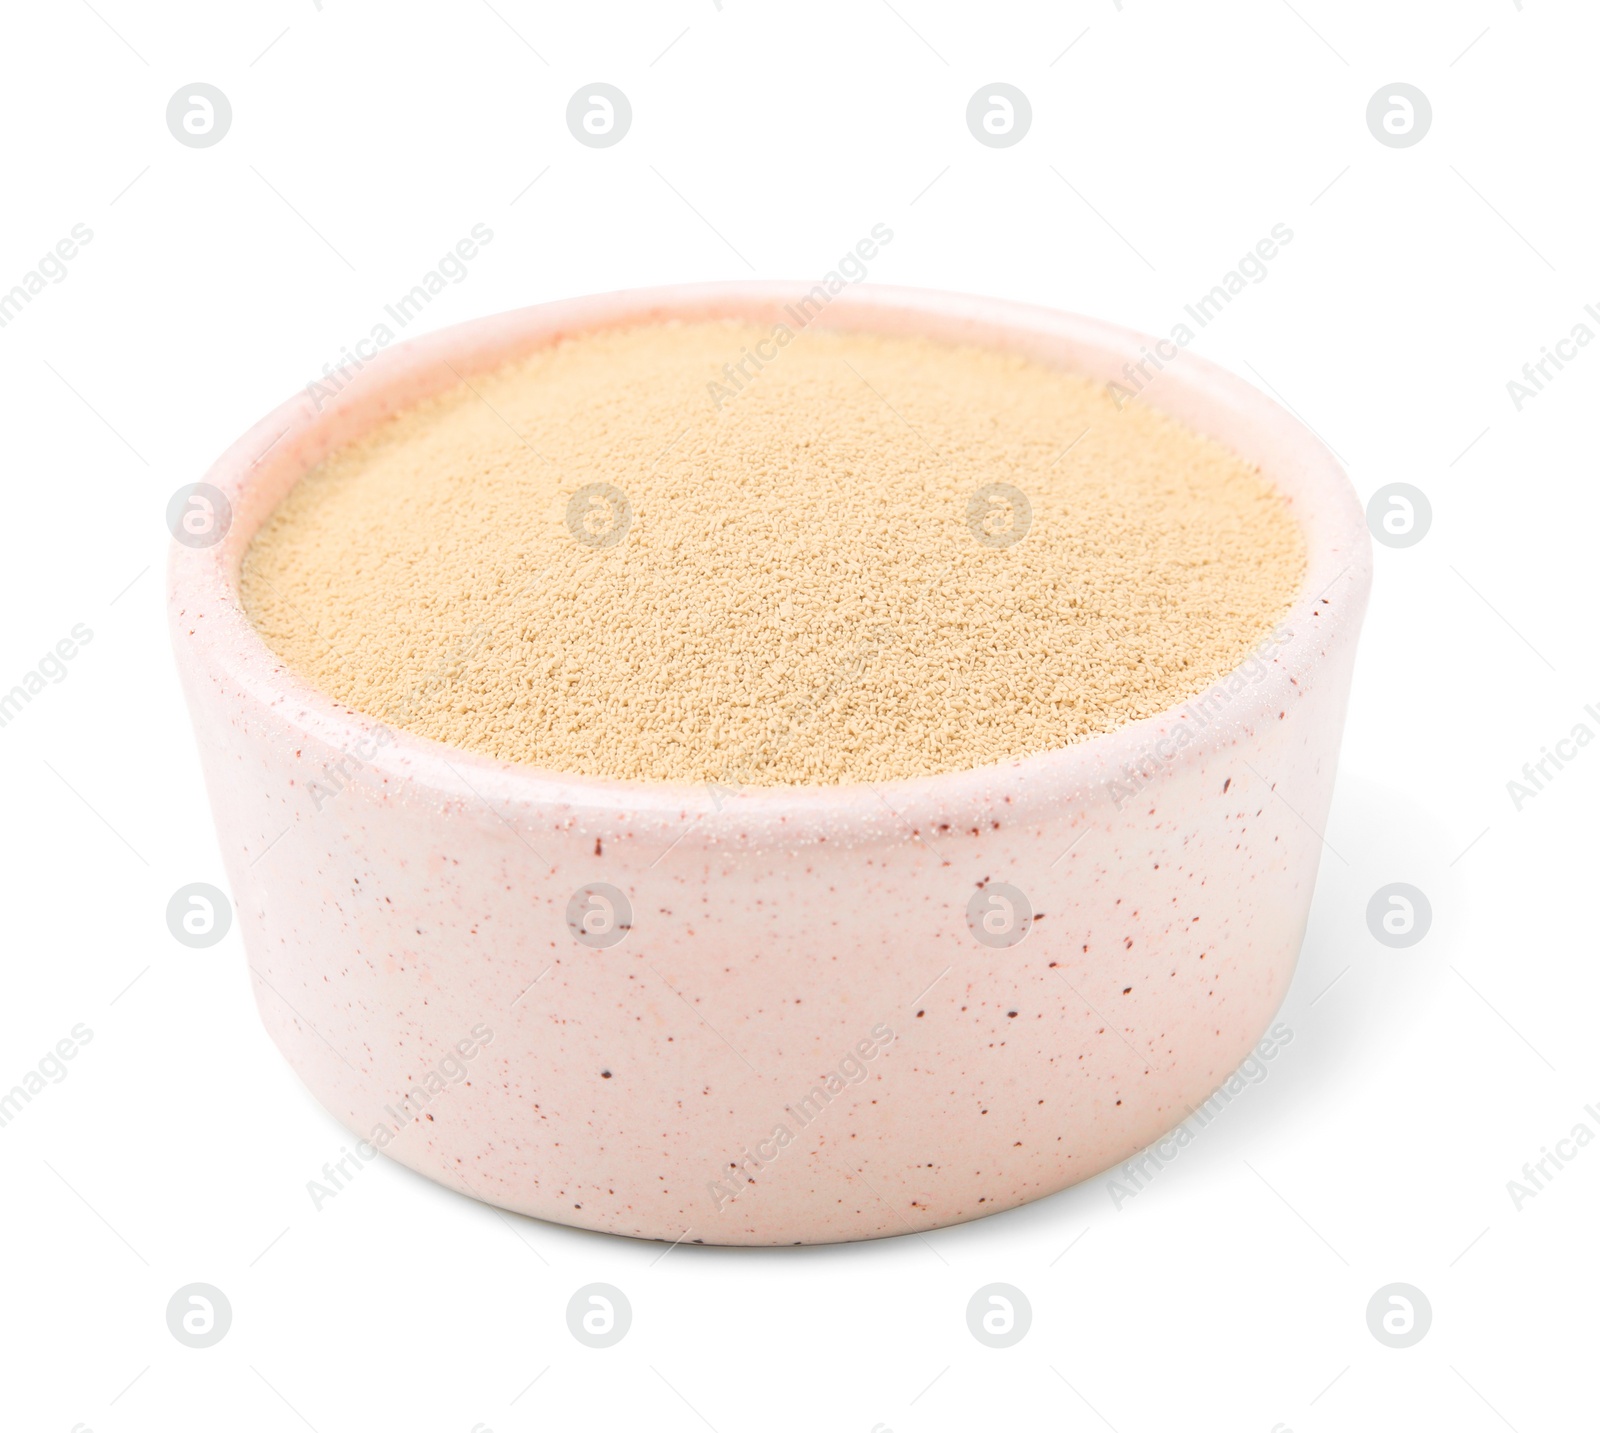 Photo of Granulated yeast in bowl isolated on white